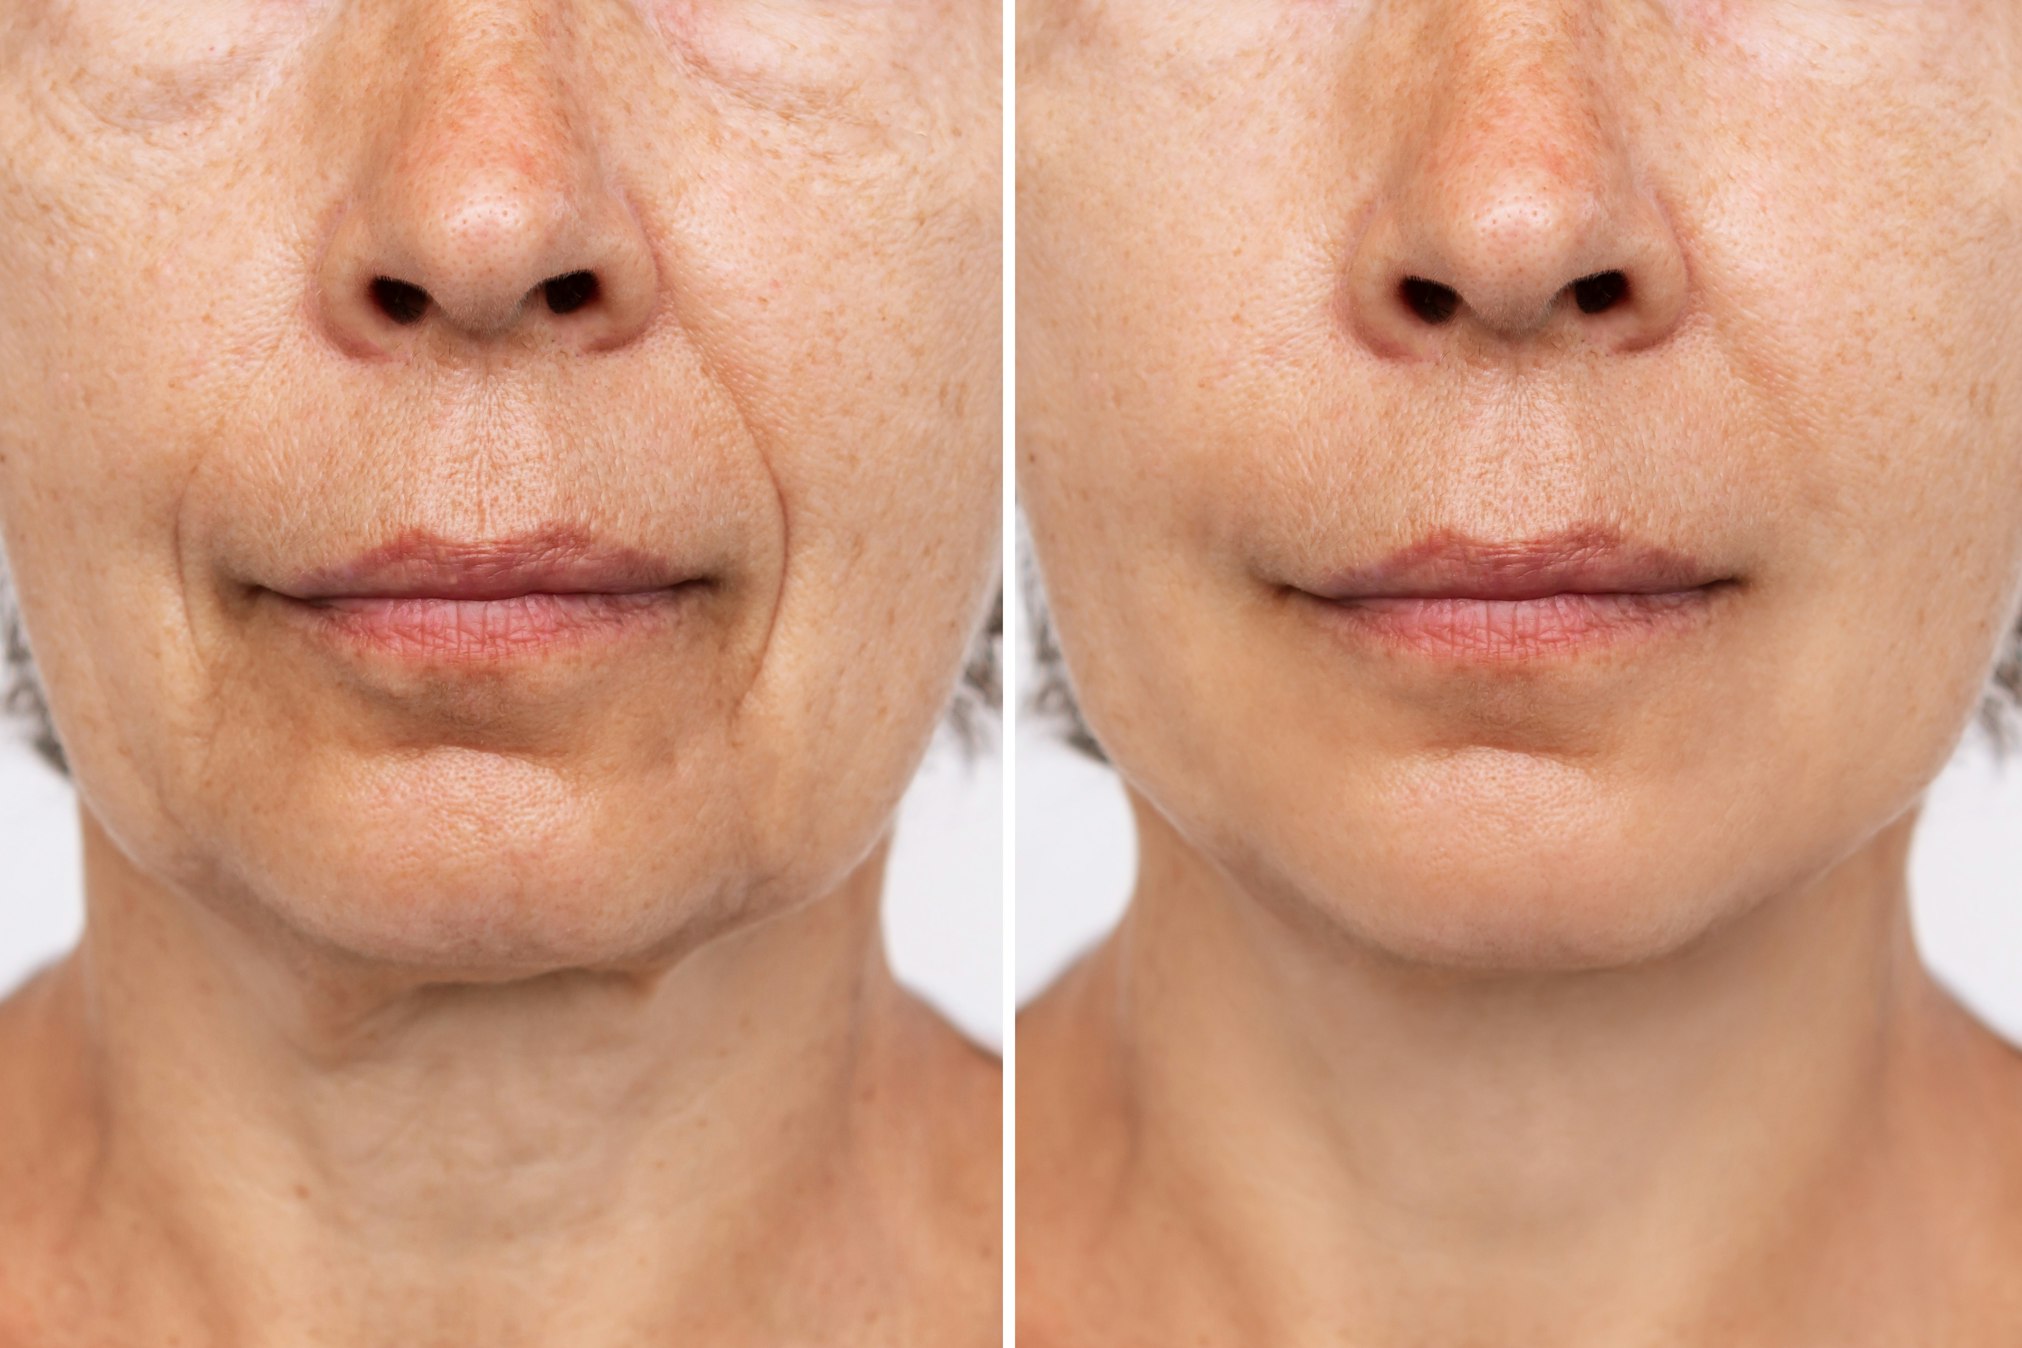 Lower part of face and neck of an elderly woman with signs of skin aging before after facelift, plastic surgery. Age-related changes, flabby sagging skin, wrinkles, creases, puffiness. Rejuvenation